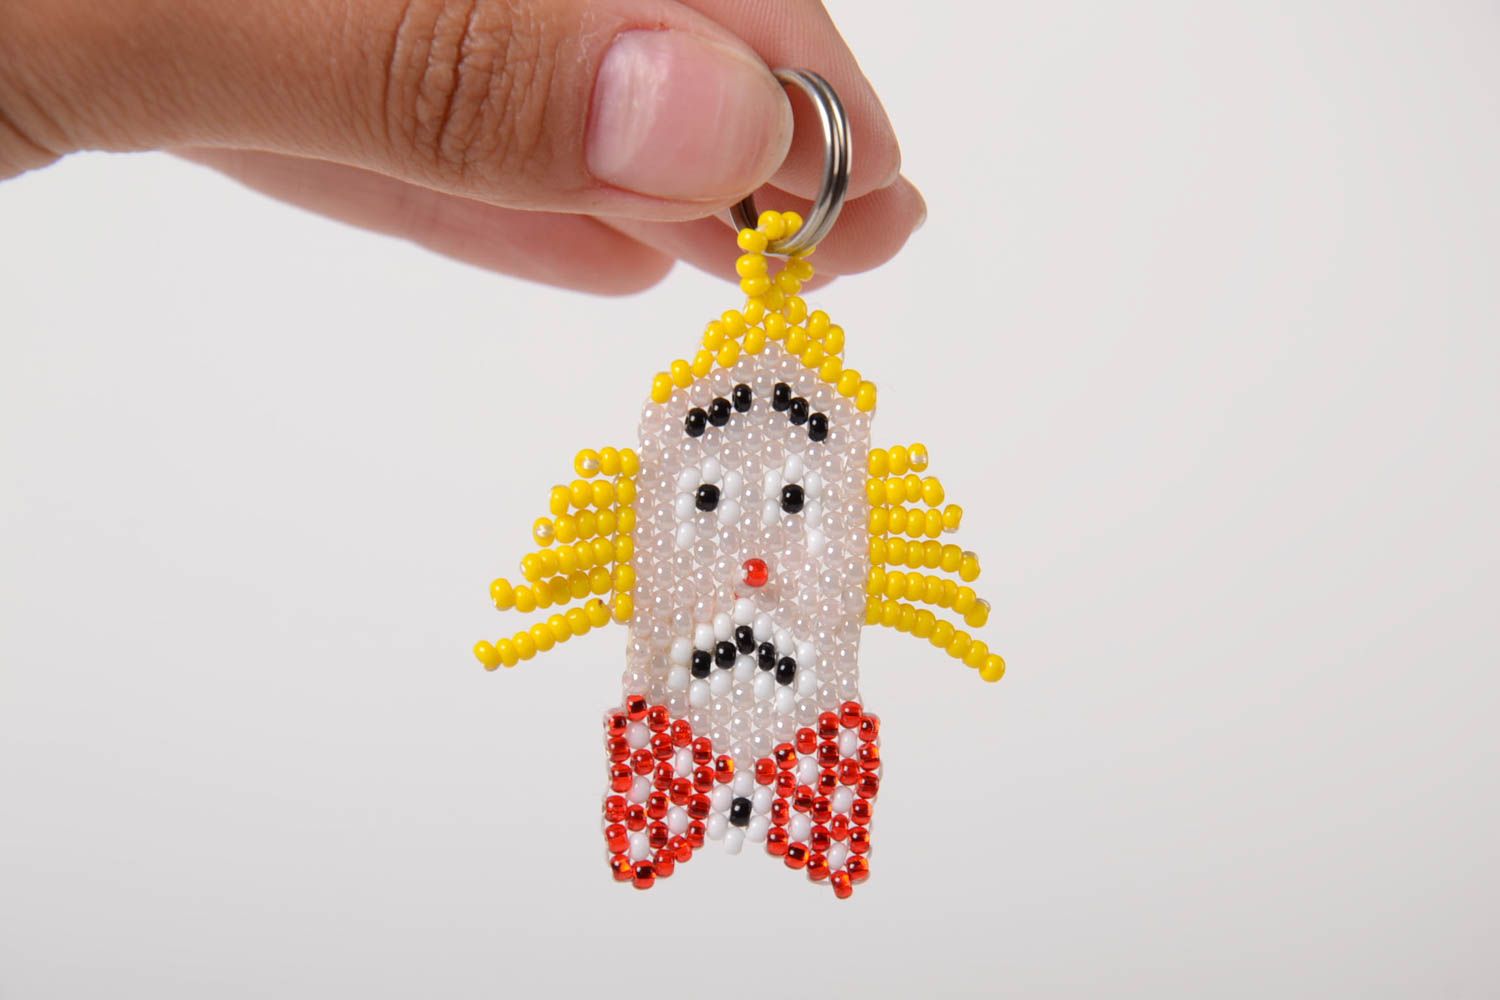 Keychain in shape of clown handmade stylish accessories cute souvenirs photo 2